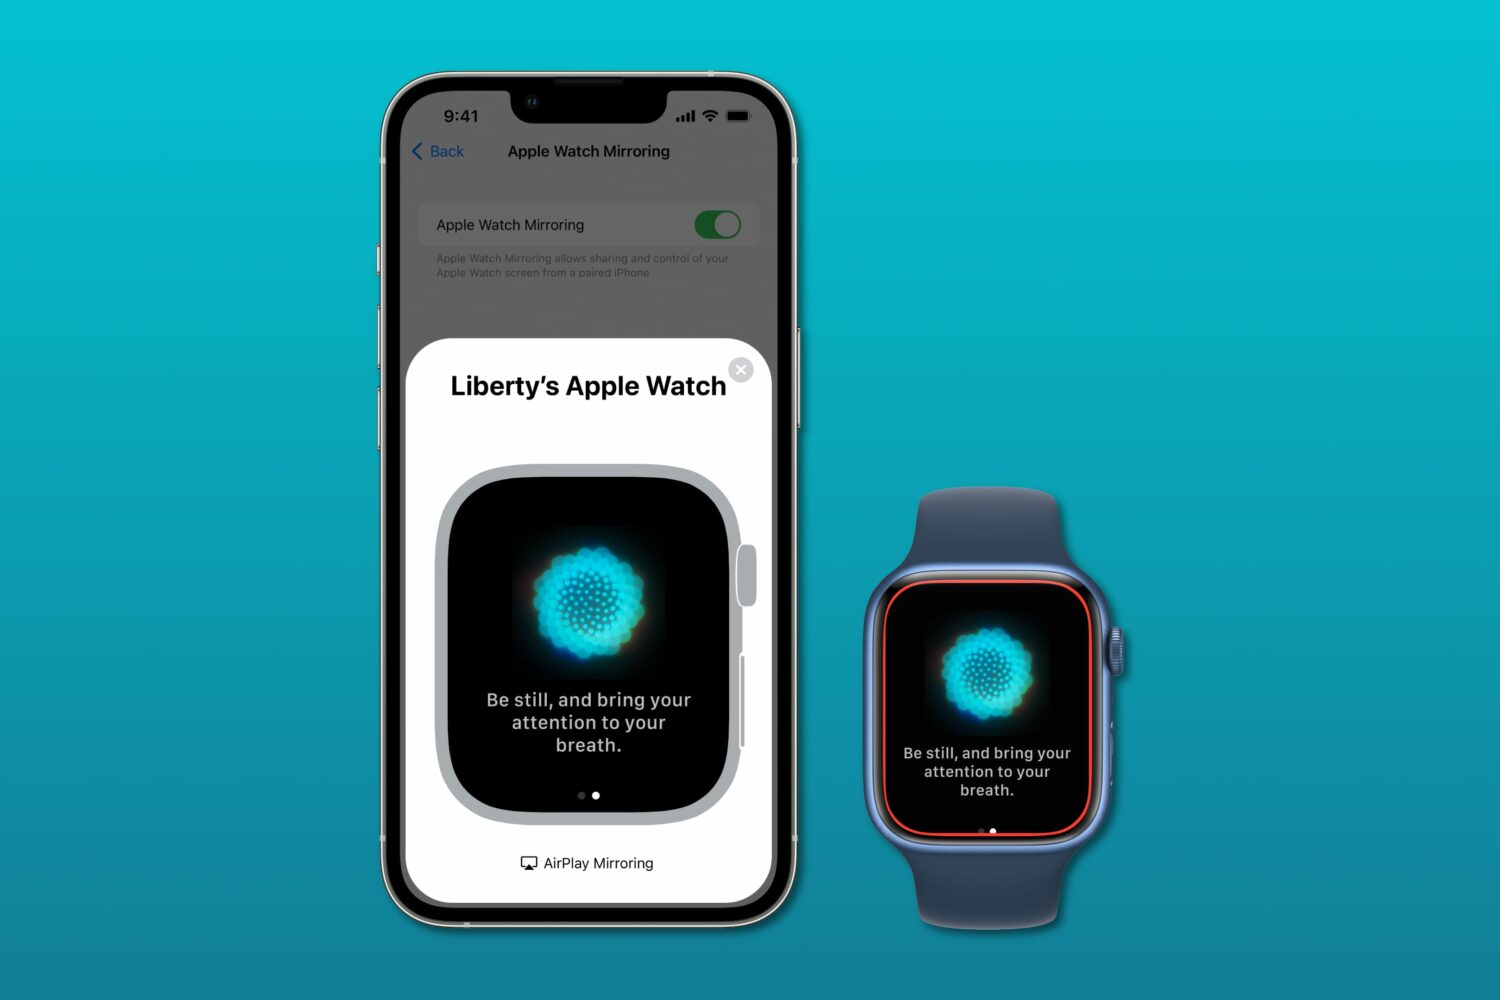 Marketing image showcasing the Apple Watch Mirroring feature for sharing the display of an Apple Watch on an iPhone and controlling the watch fully using touch and assistive technologies on the phone